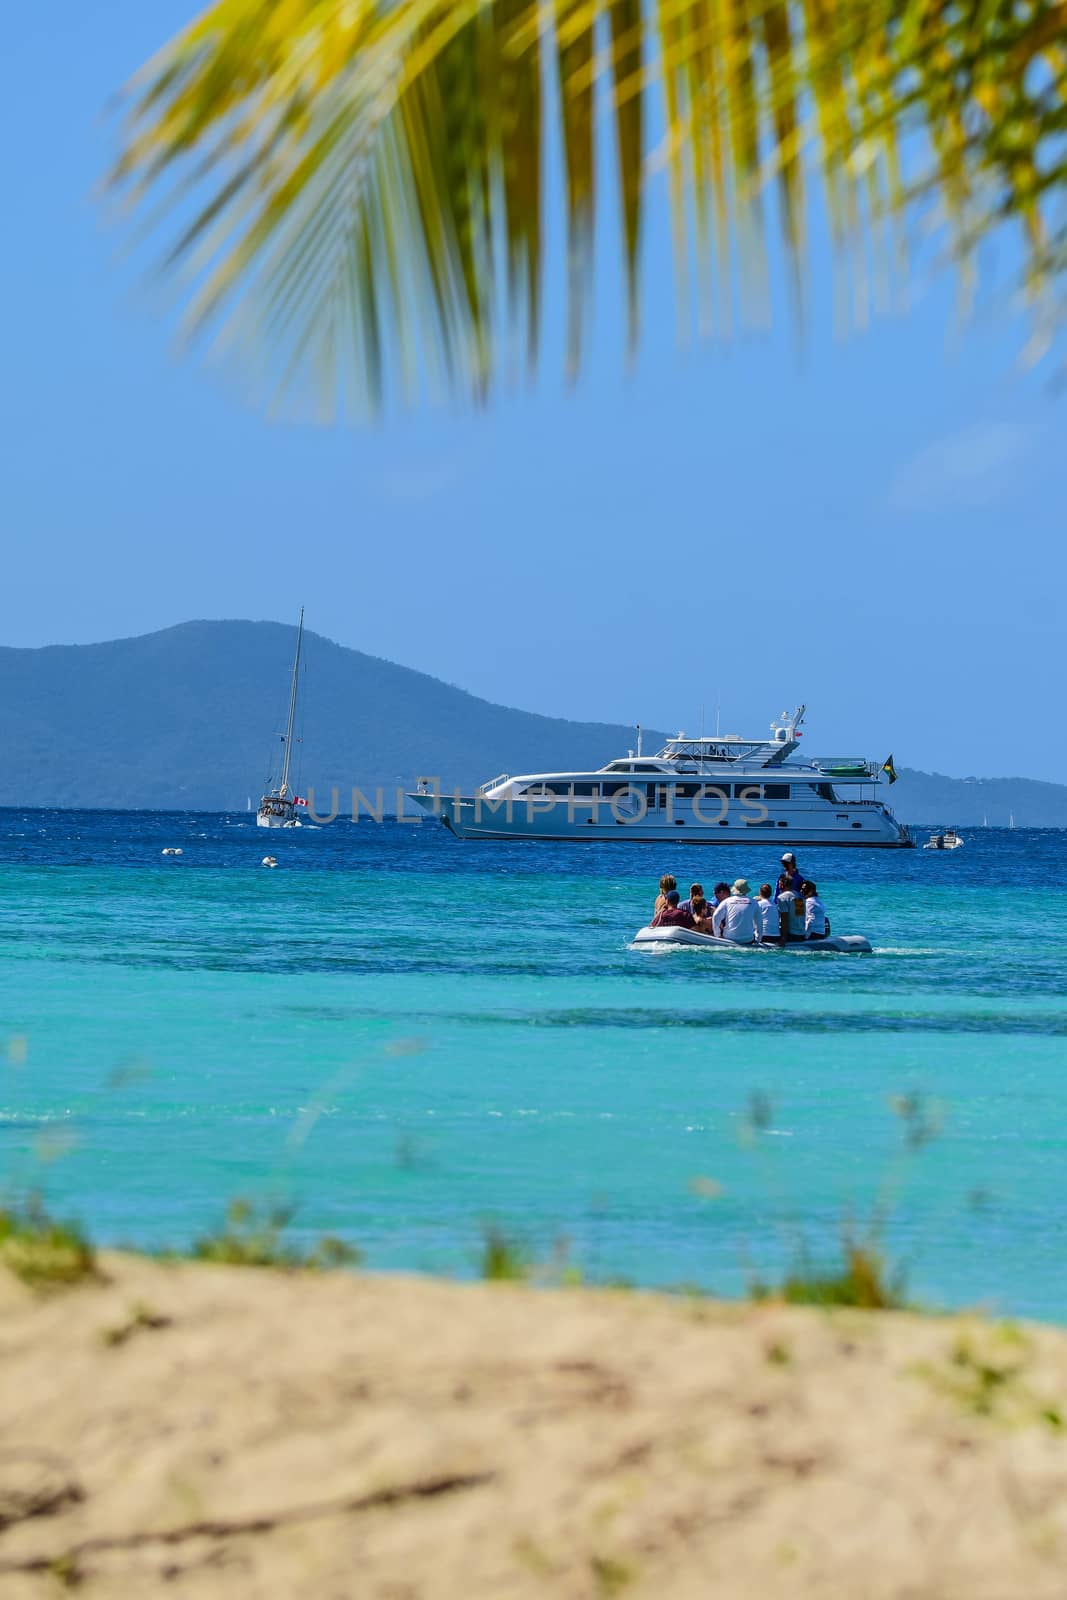 Crew of megayacht coming ashore for visits to bars and stores in British Virgin Islands